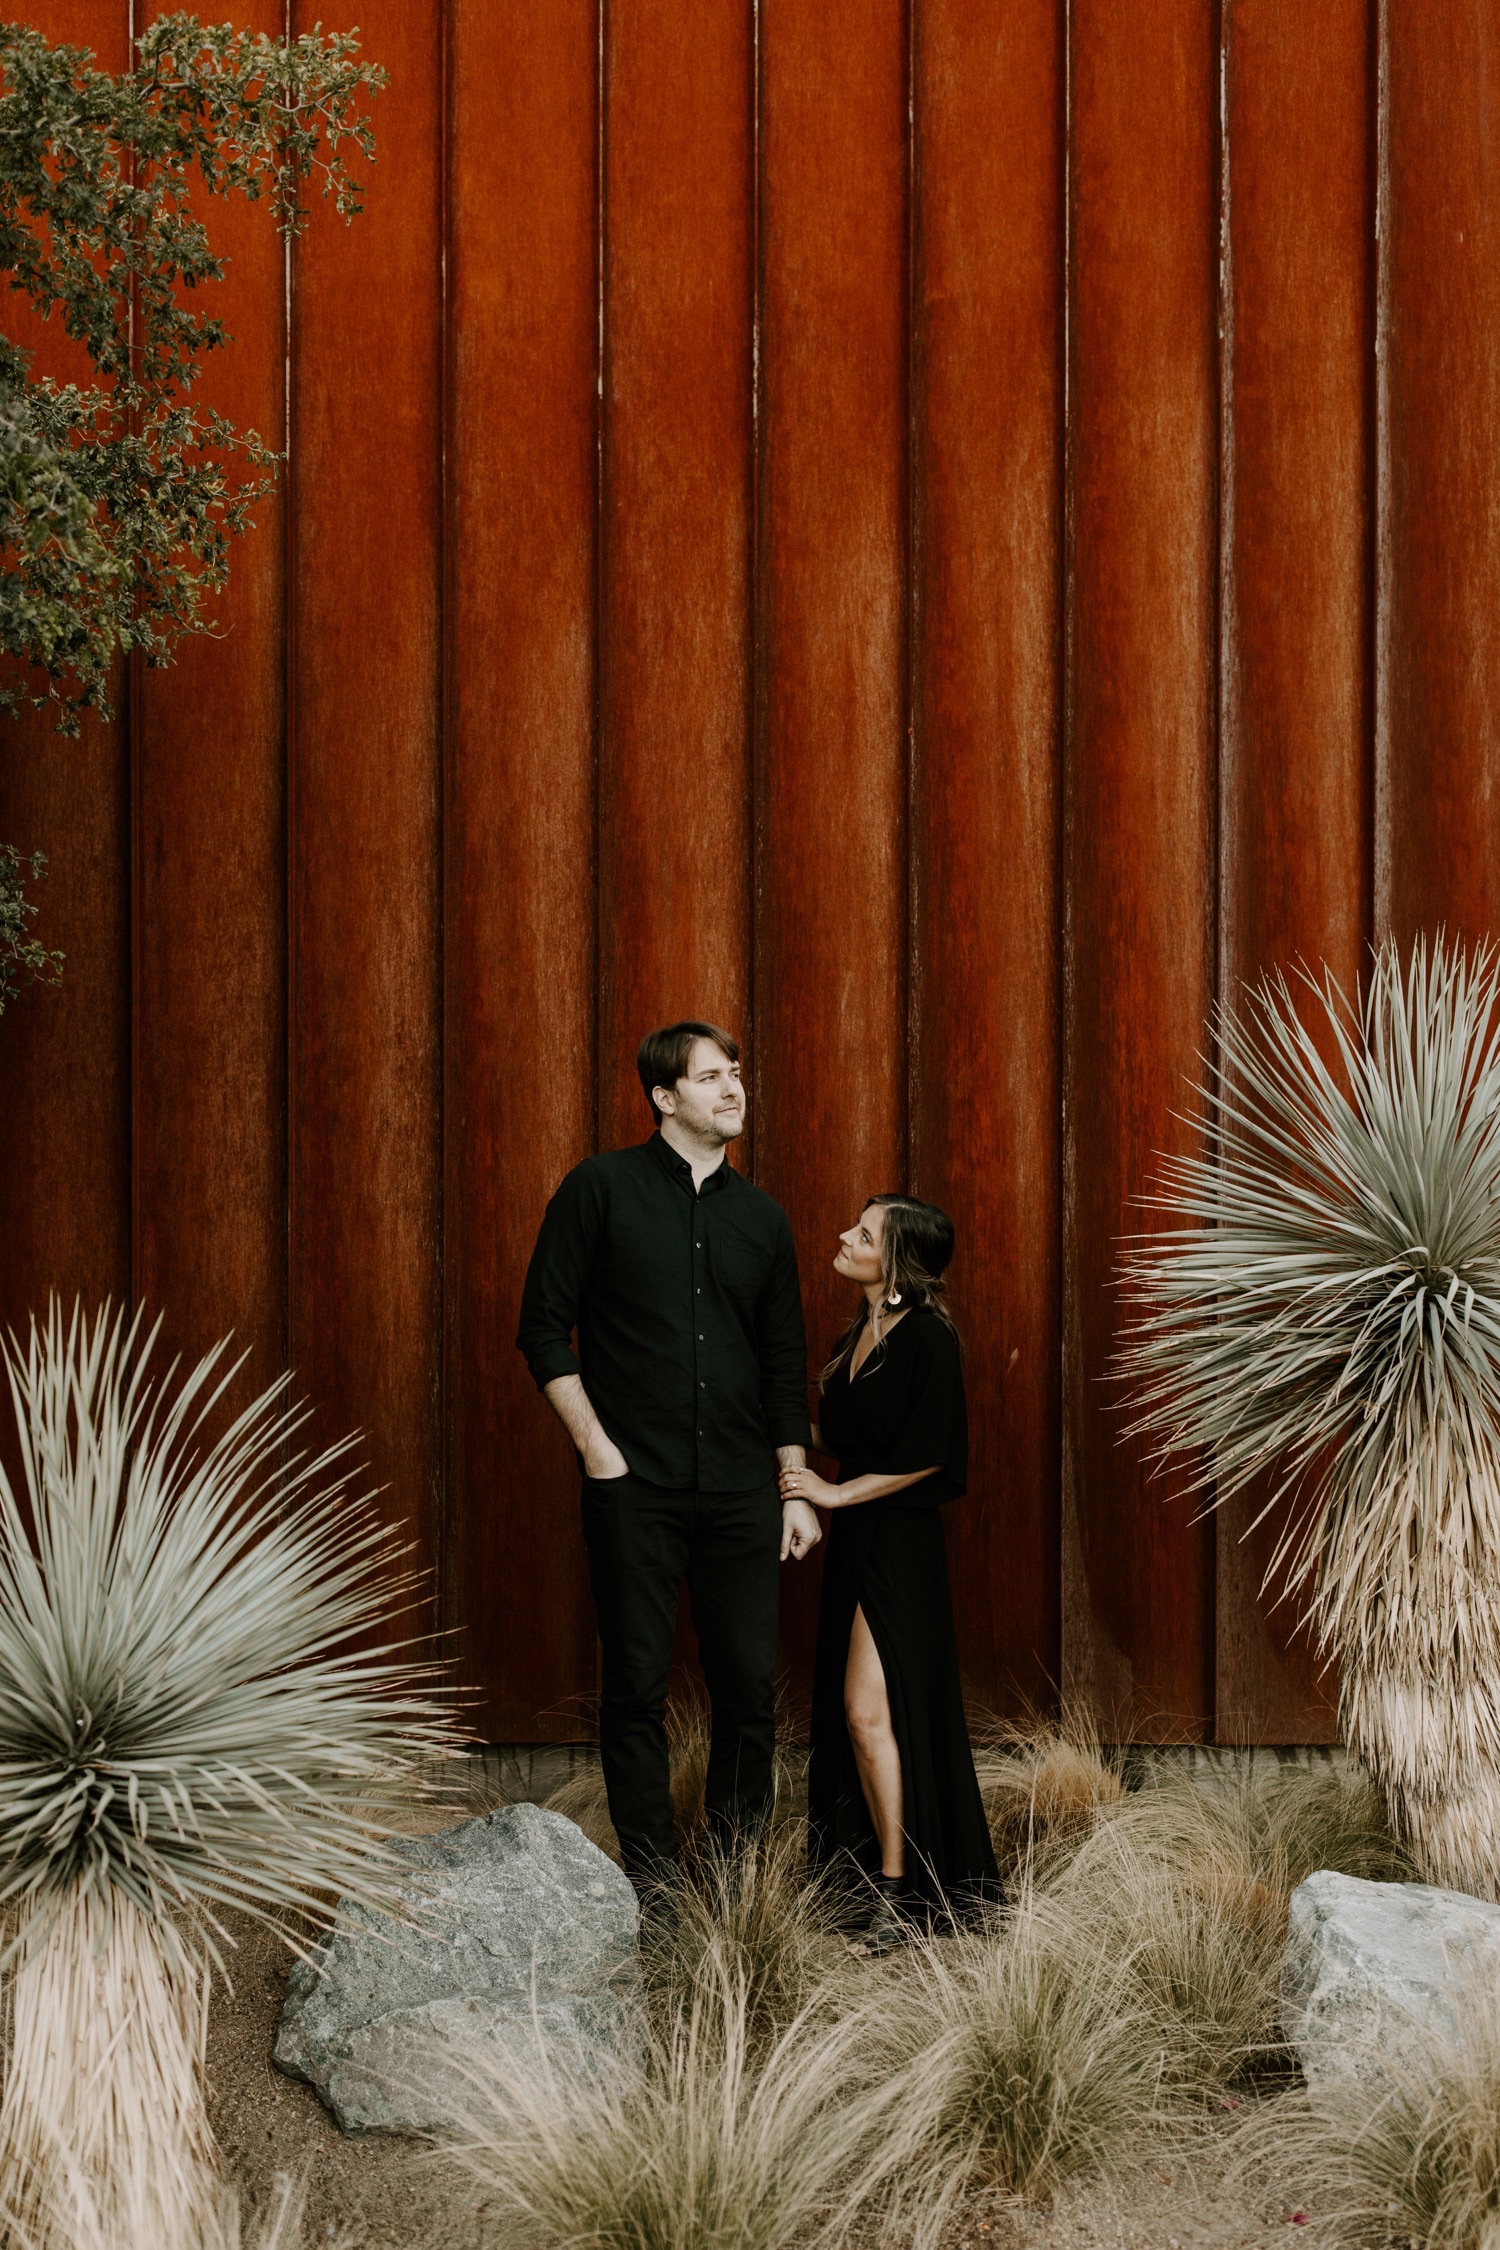 Rustic modern wall in Palm Springs for this couples engagement session